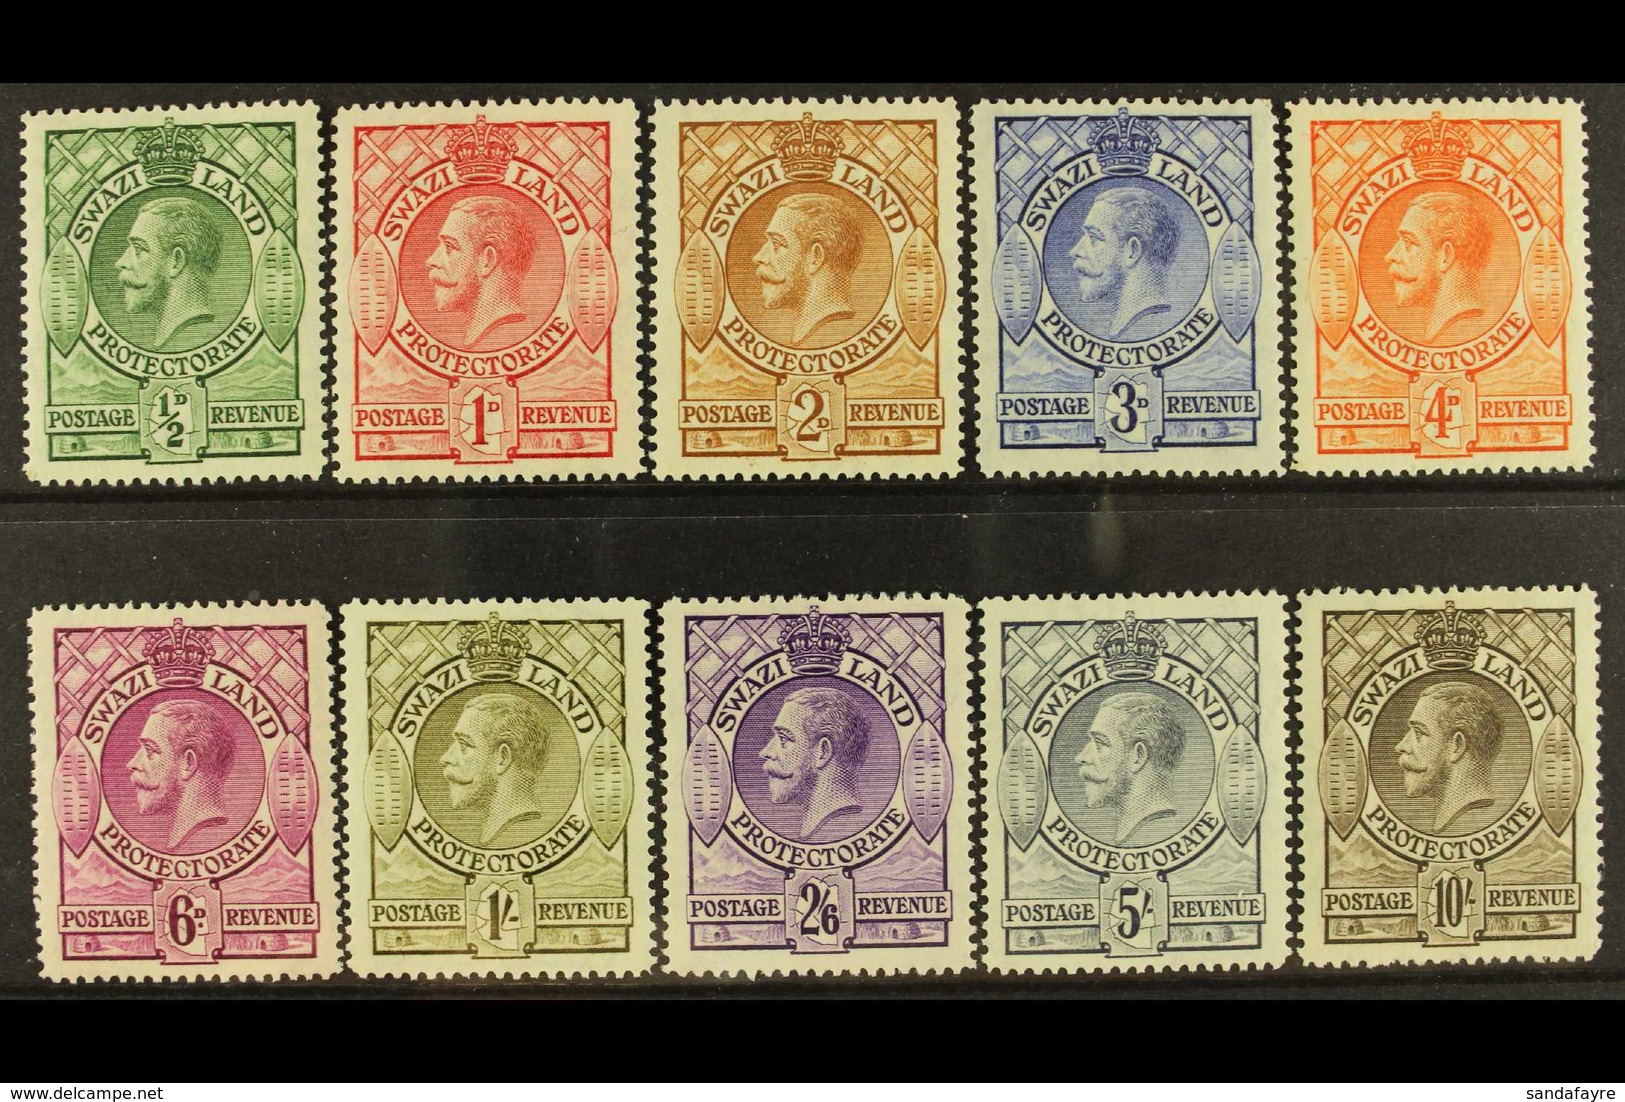 1933 Complete King George V Definitive Set, SG 11/20, Very Fine Mint. (10 Stamps) For More Images, Please Visit Http://w - Swasiland (...-1967)